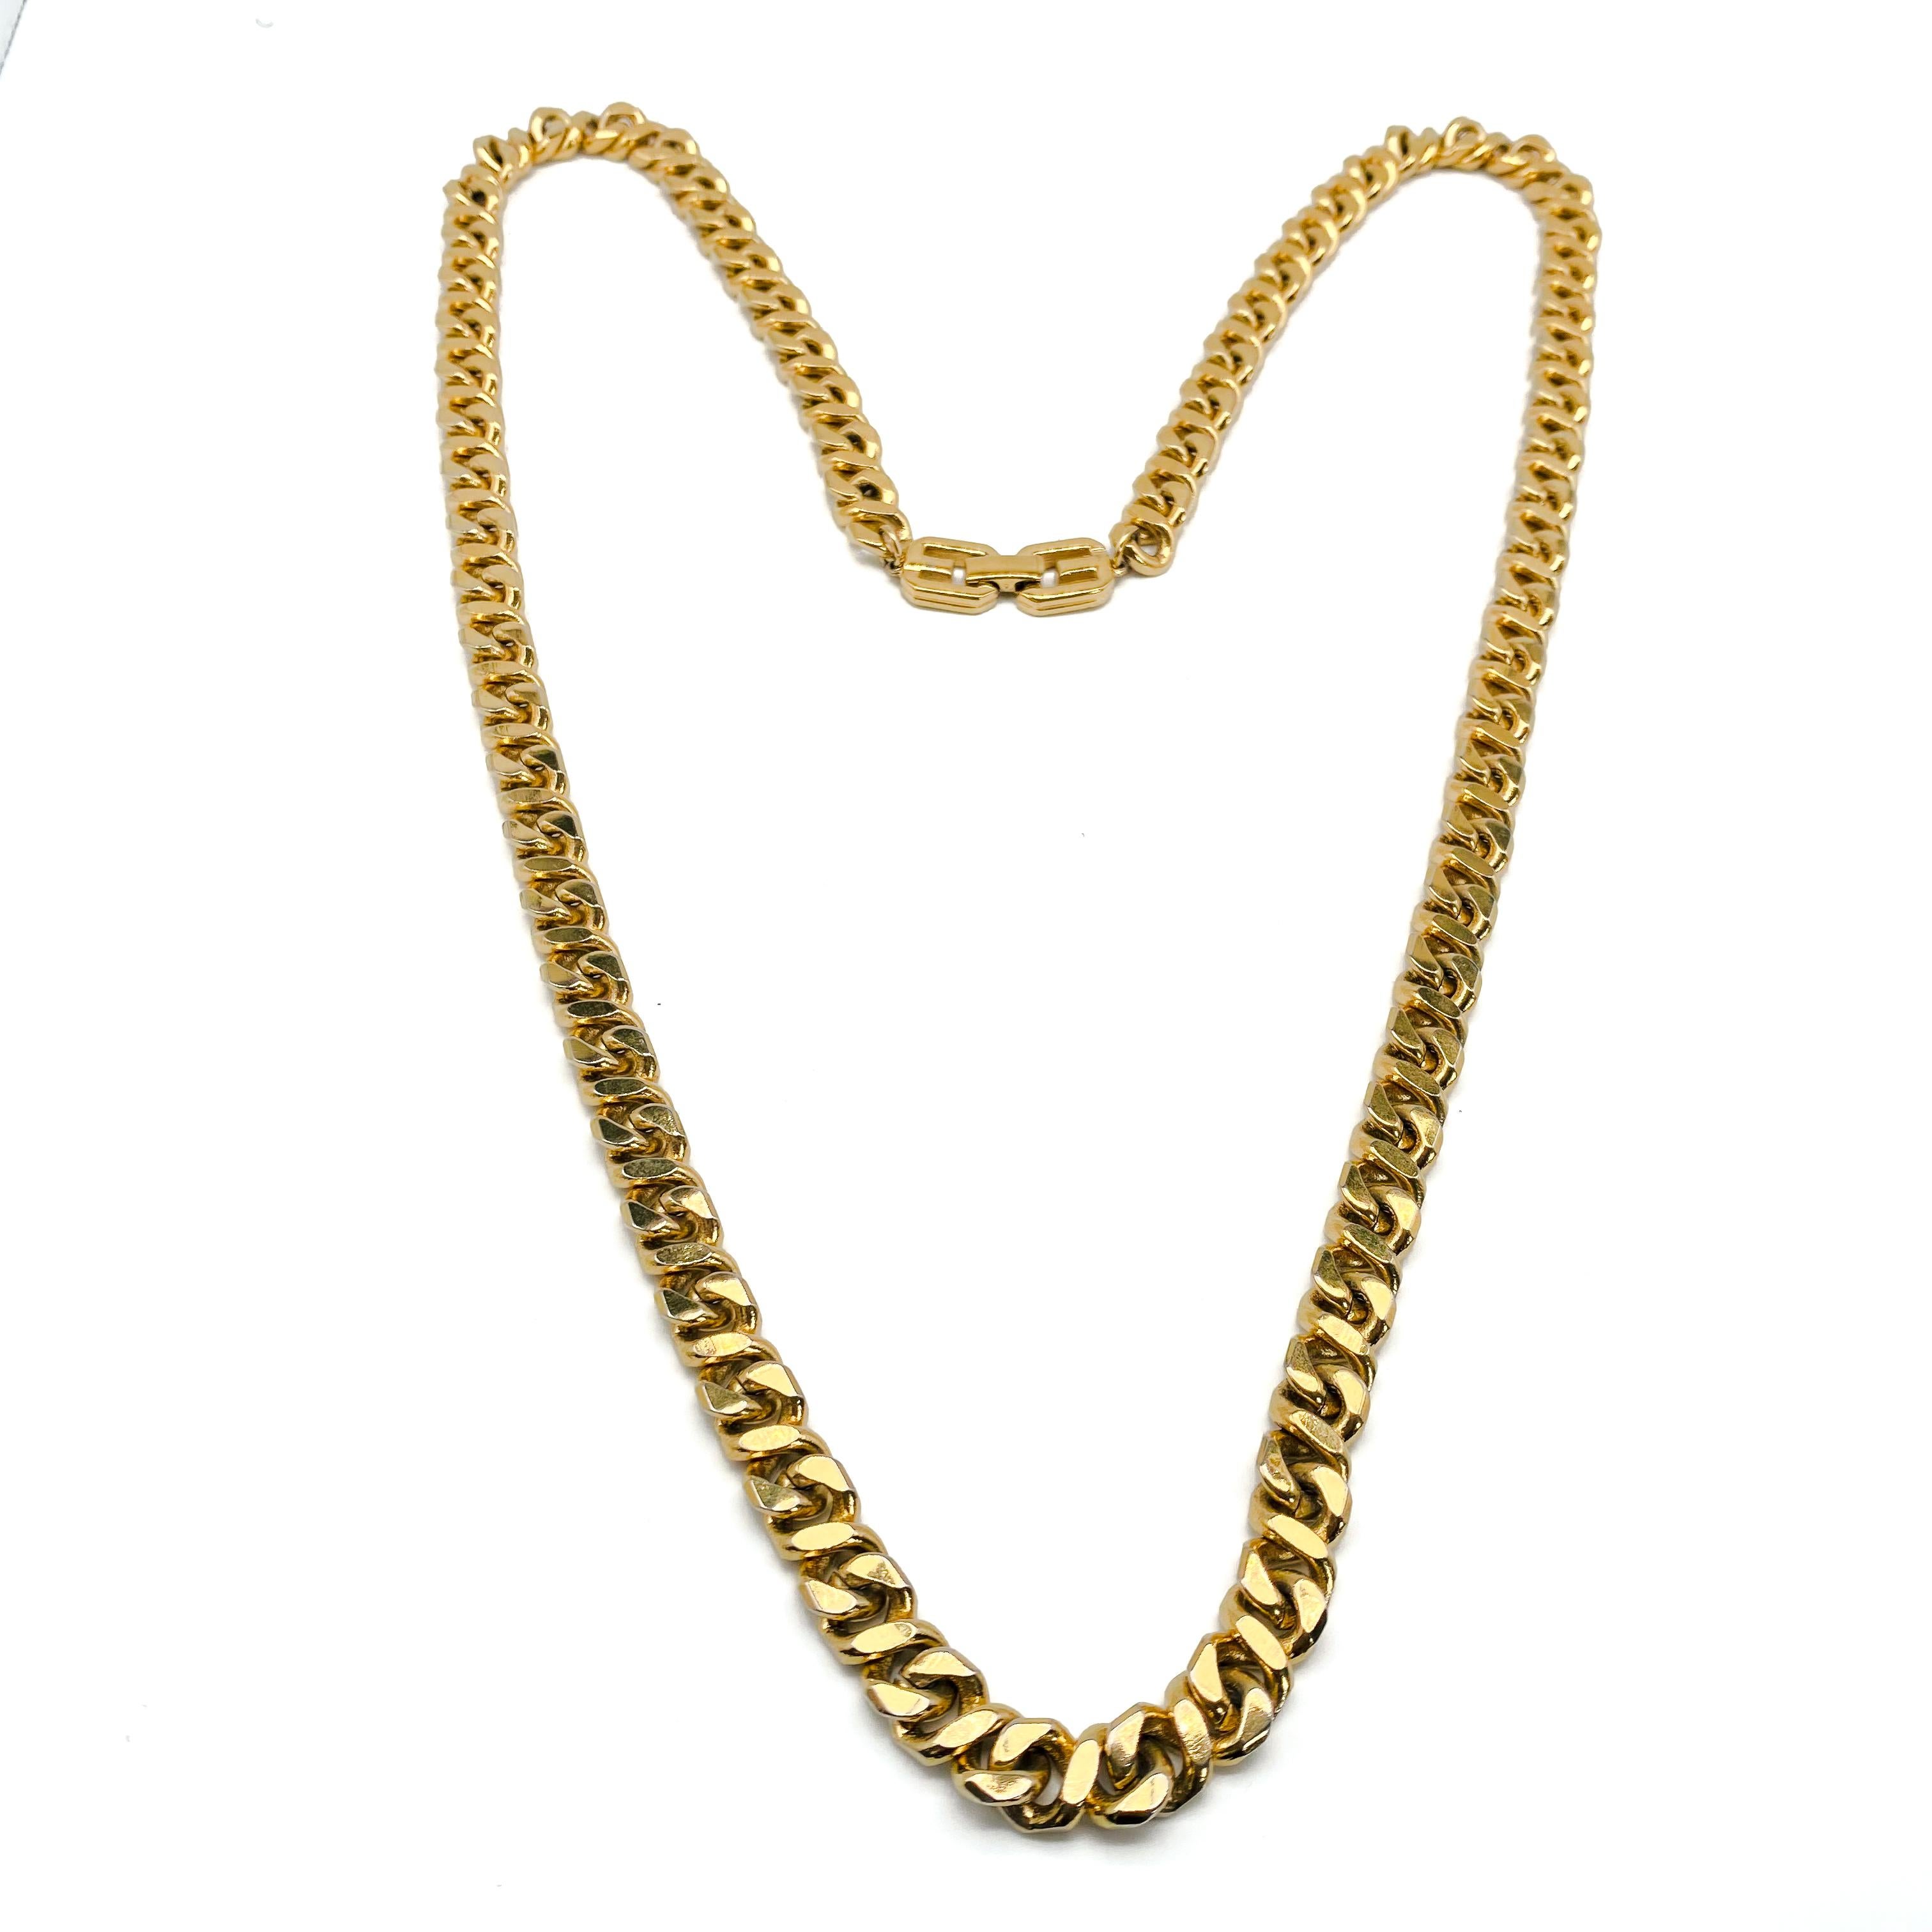 Women's Vintage Givenchy Gold Plated Chain Necklace 1980s